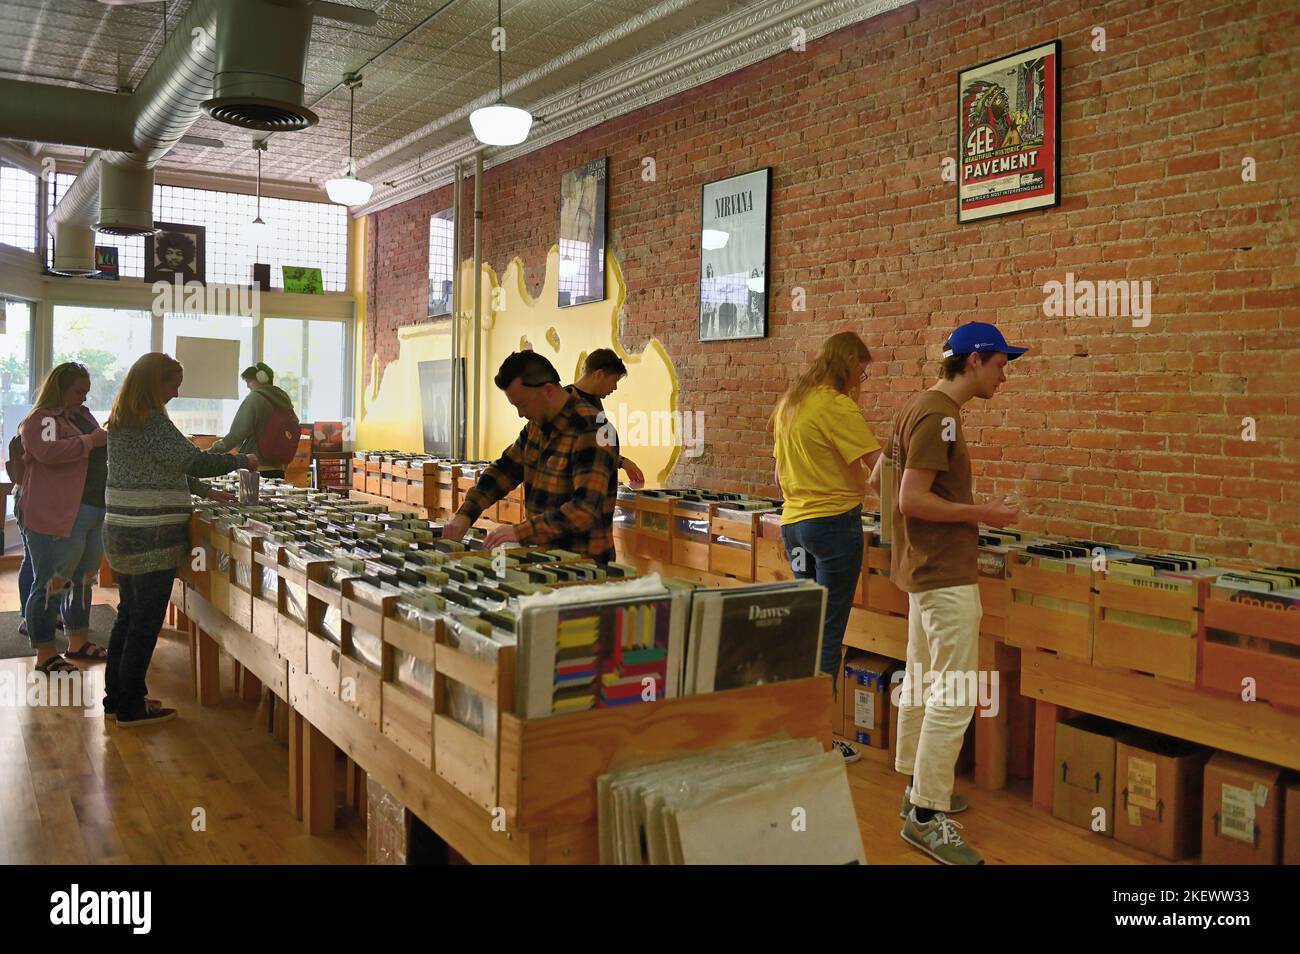 Ann Arbor, Michigan, USA. A record store featuring vintage vinyl recordings. The shop is located near the University of Michigan campus. Stock Photo